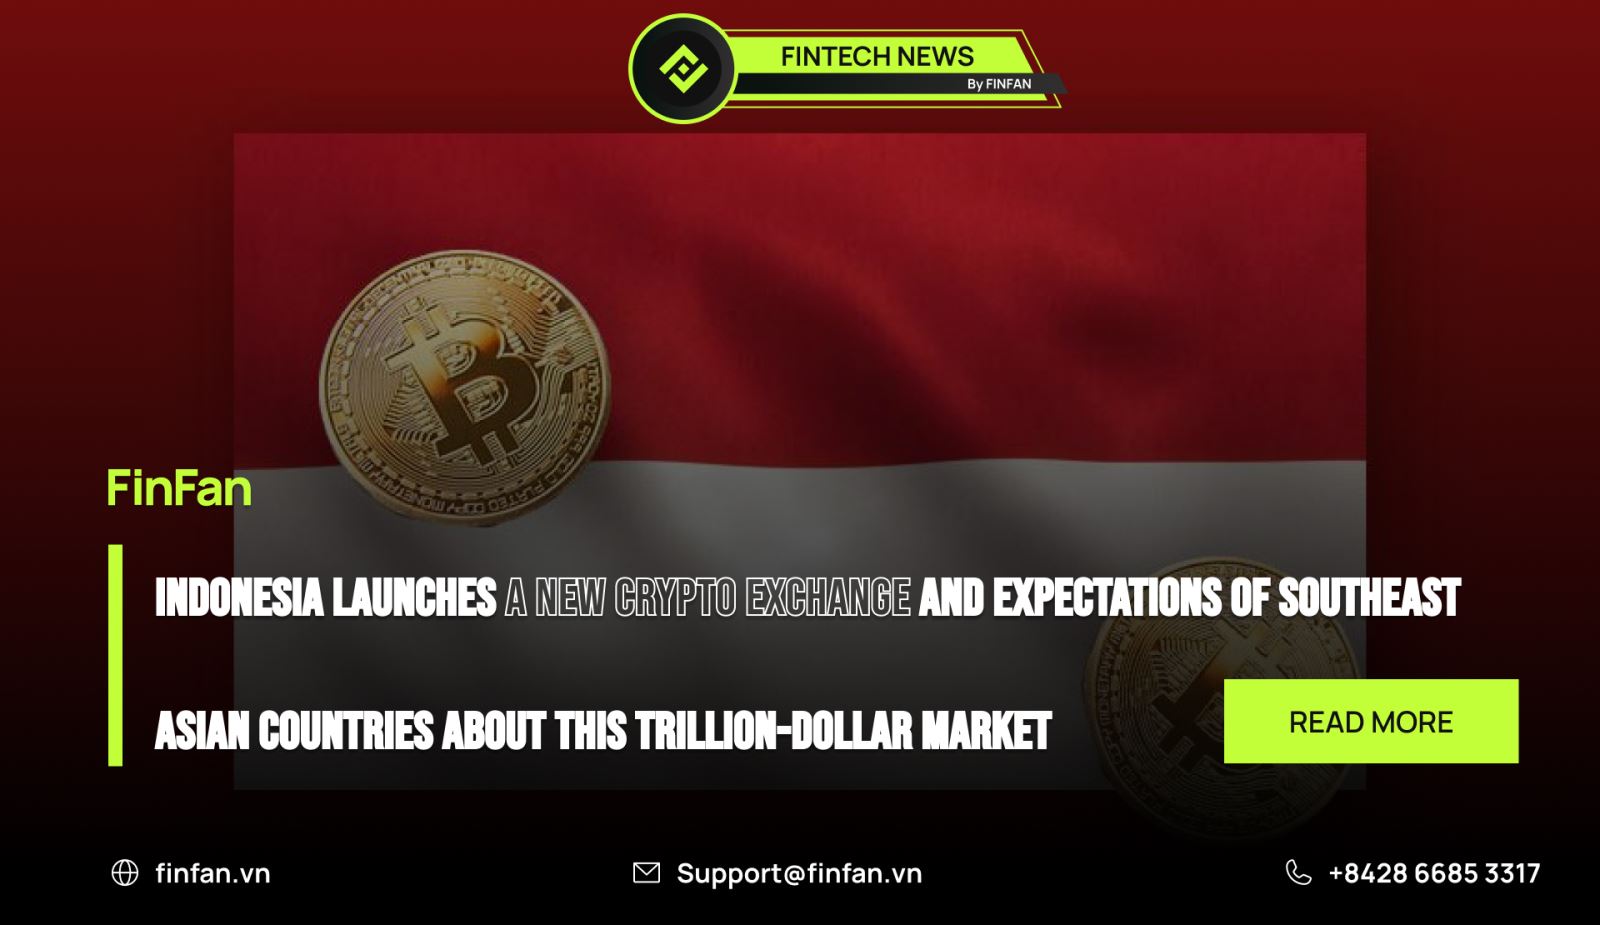 Indonesia launches a new crypto exchange and expectations of Southeast Asian countries about this trillion-dollar market